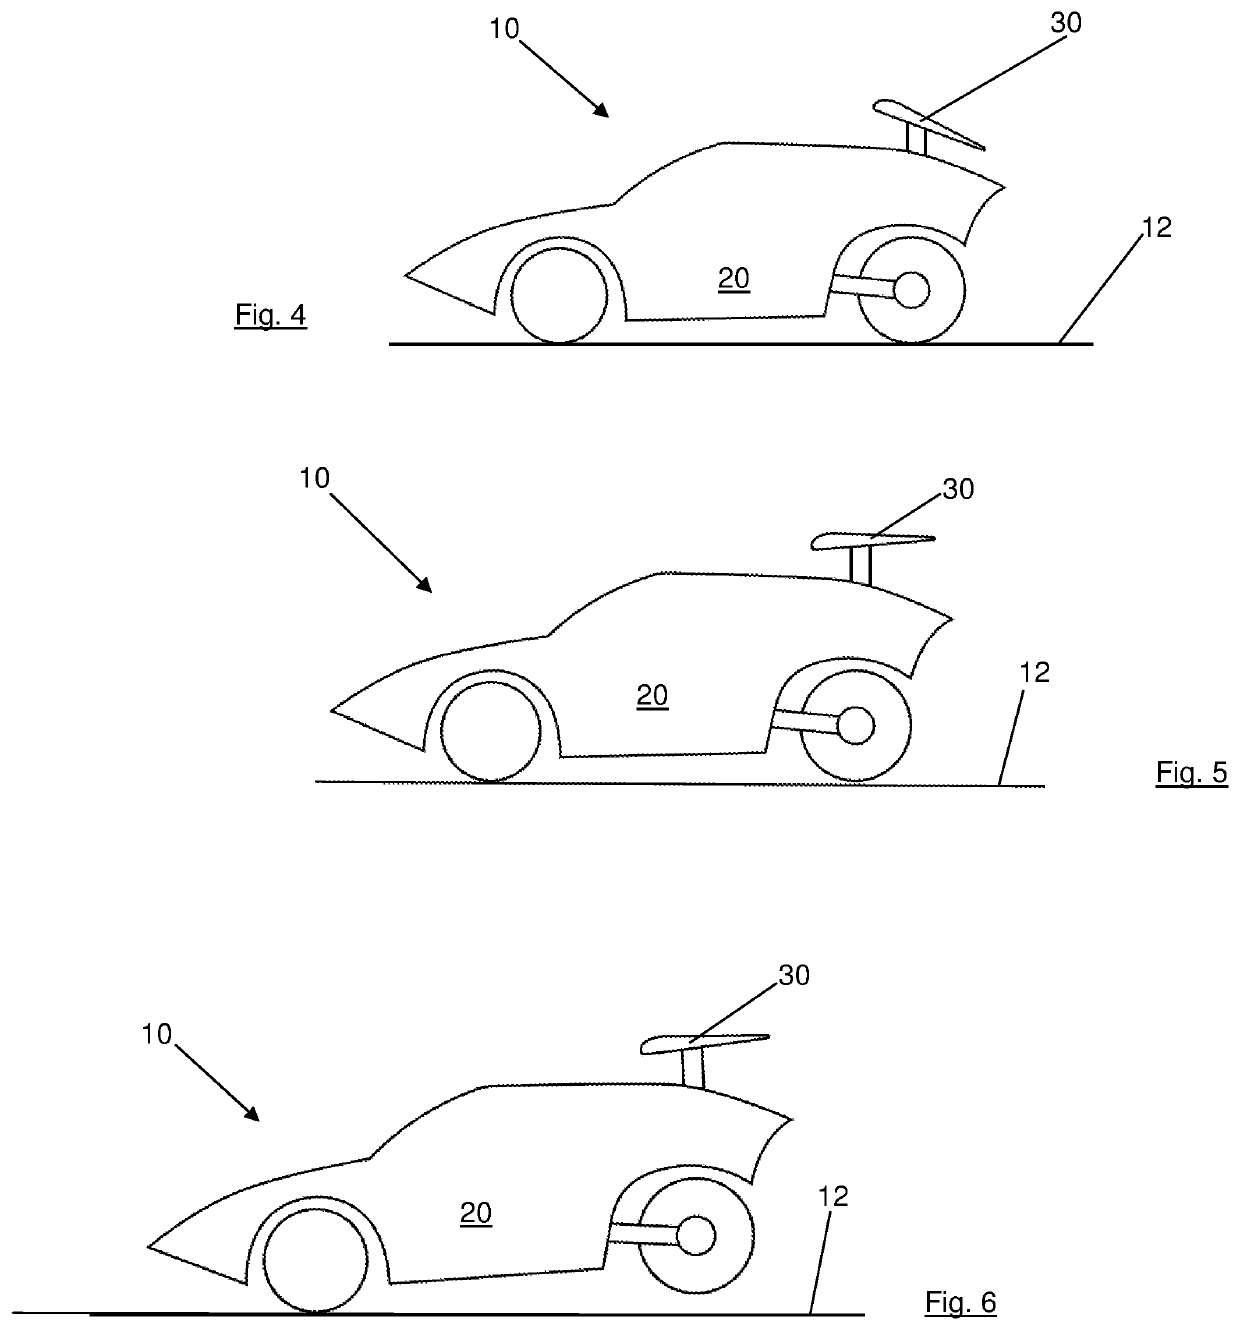 Enhanced vehicle efficiency using airfoil to raise rear wheels above road surface